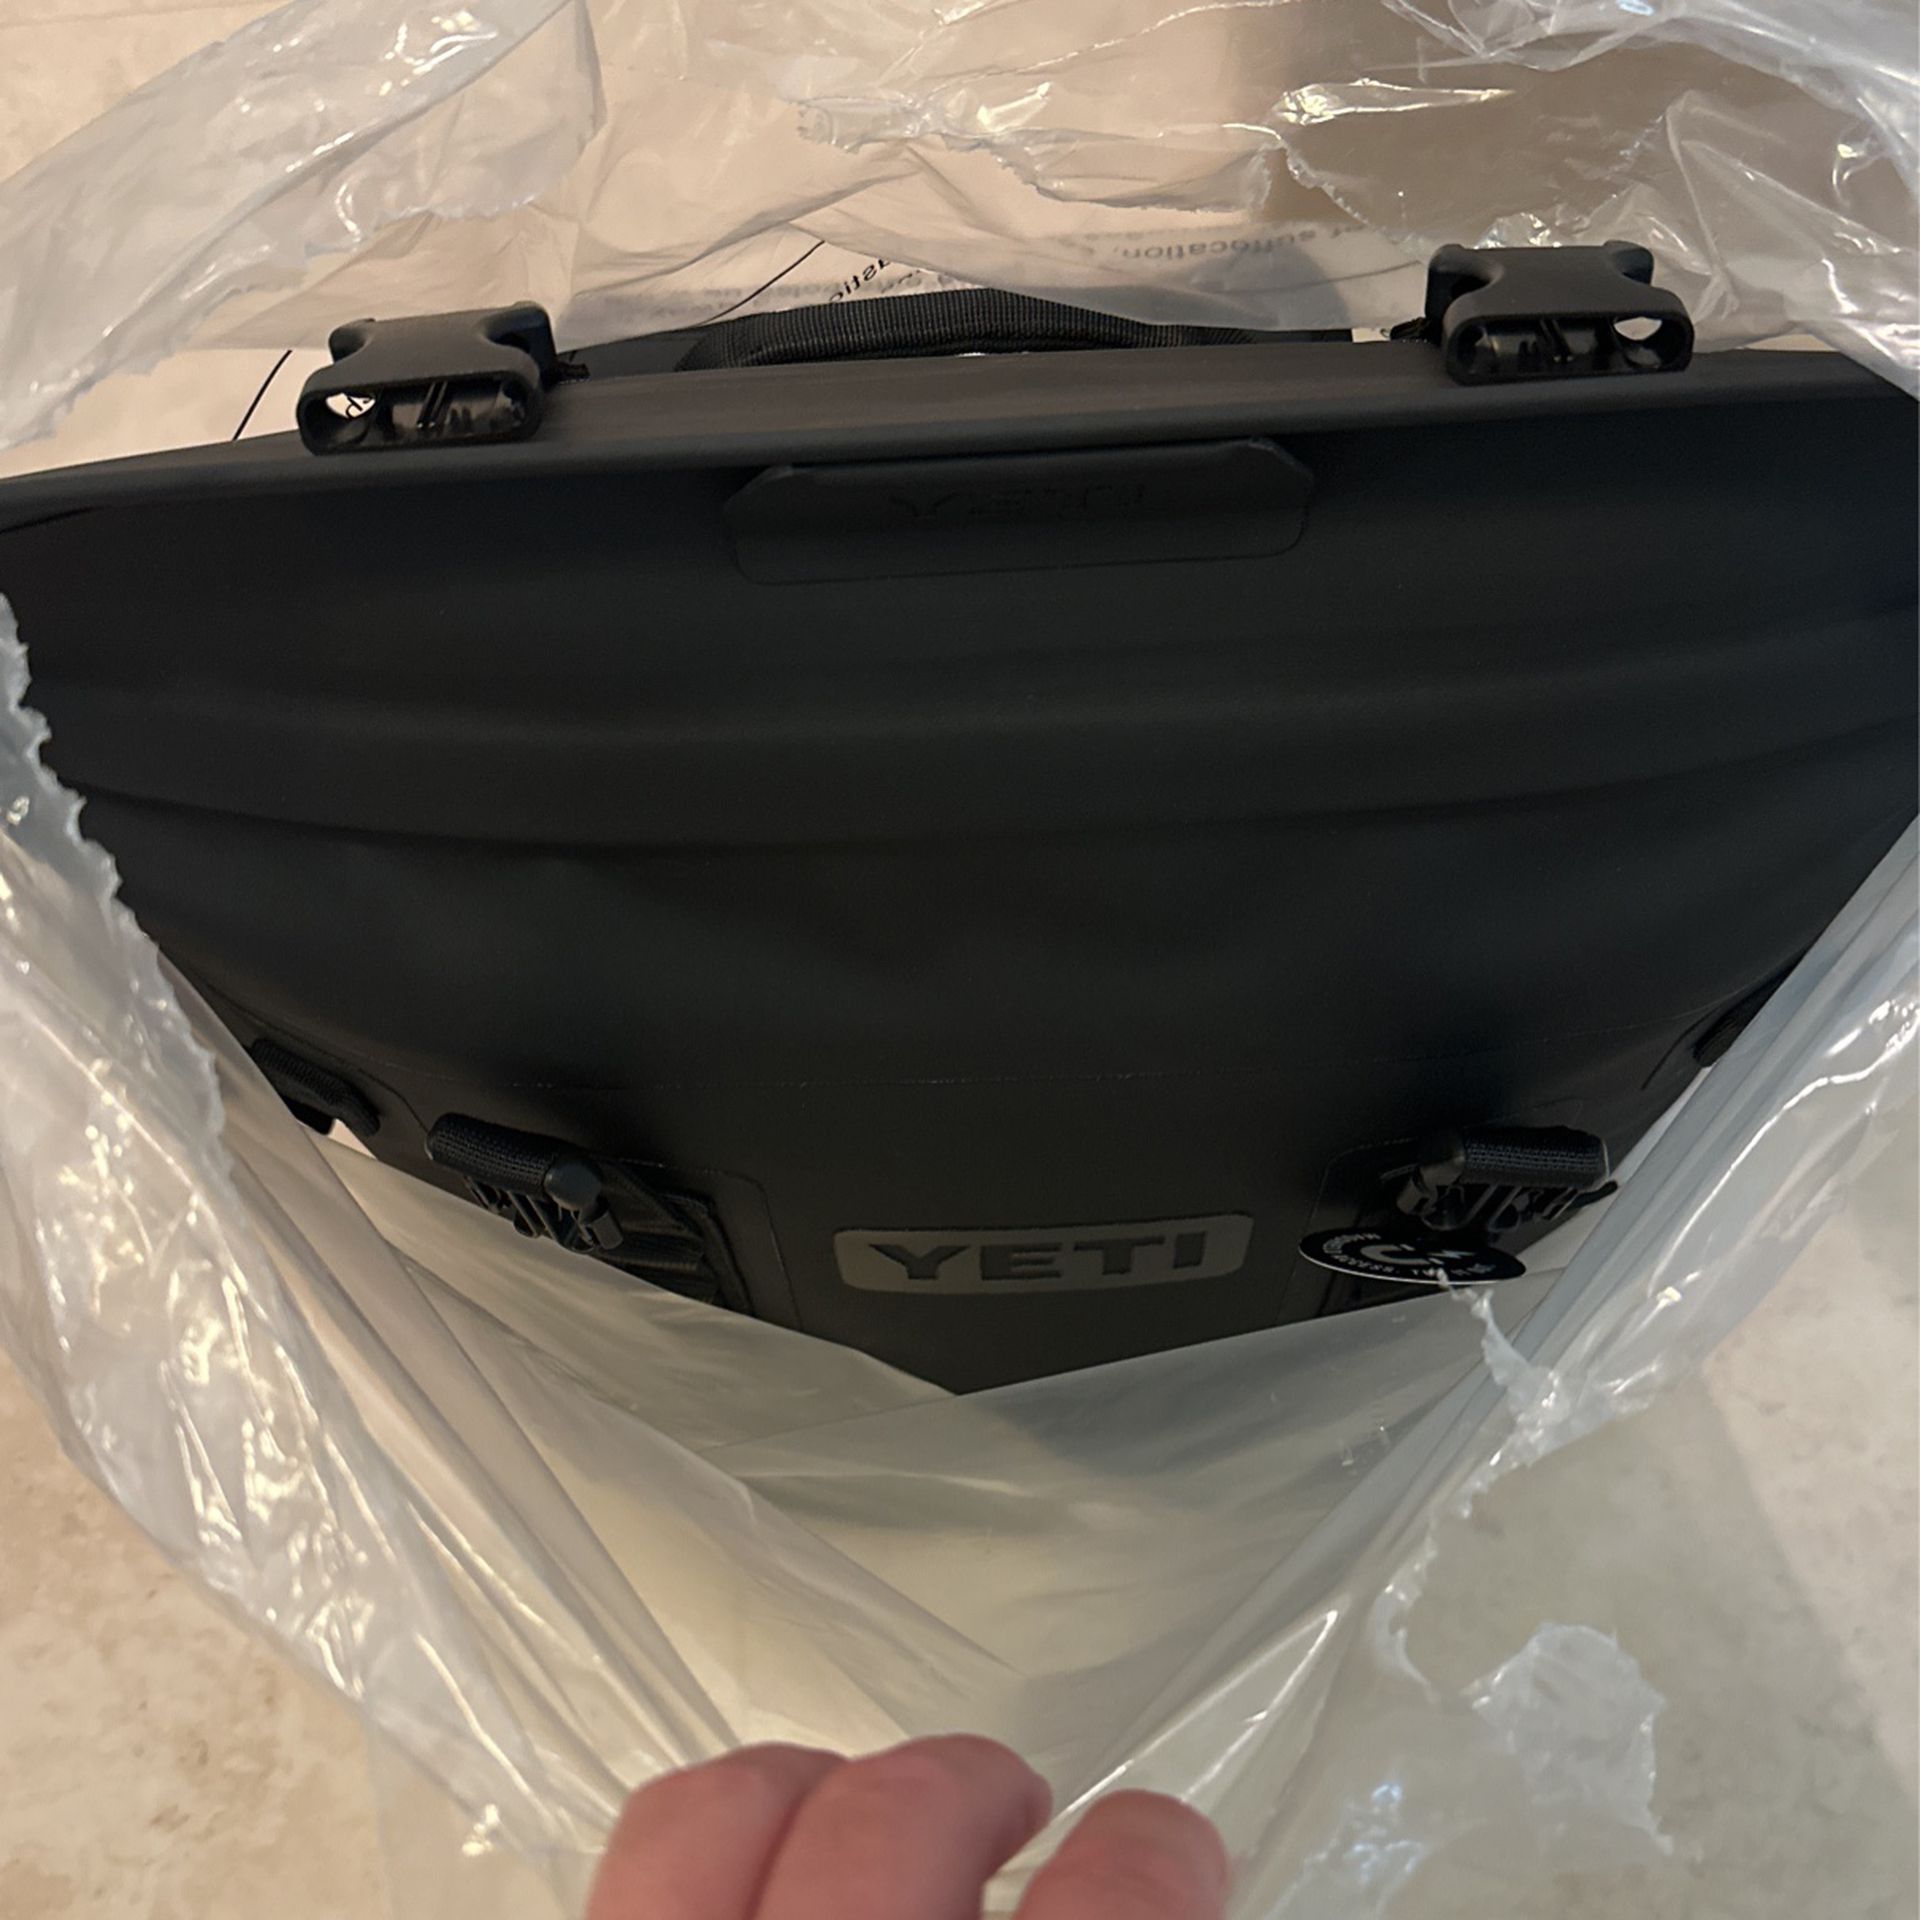 NEW YETI M20 SOFT BACKPACK COOLER IN CHARCOAL for Sale in Addison, TX -  OfferUp